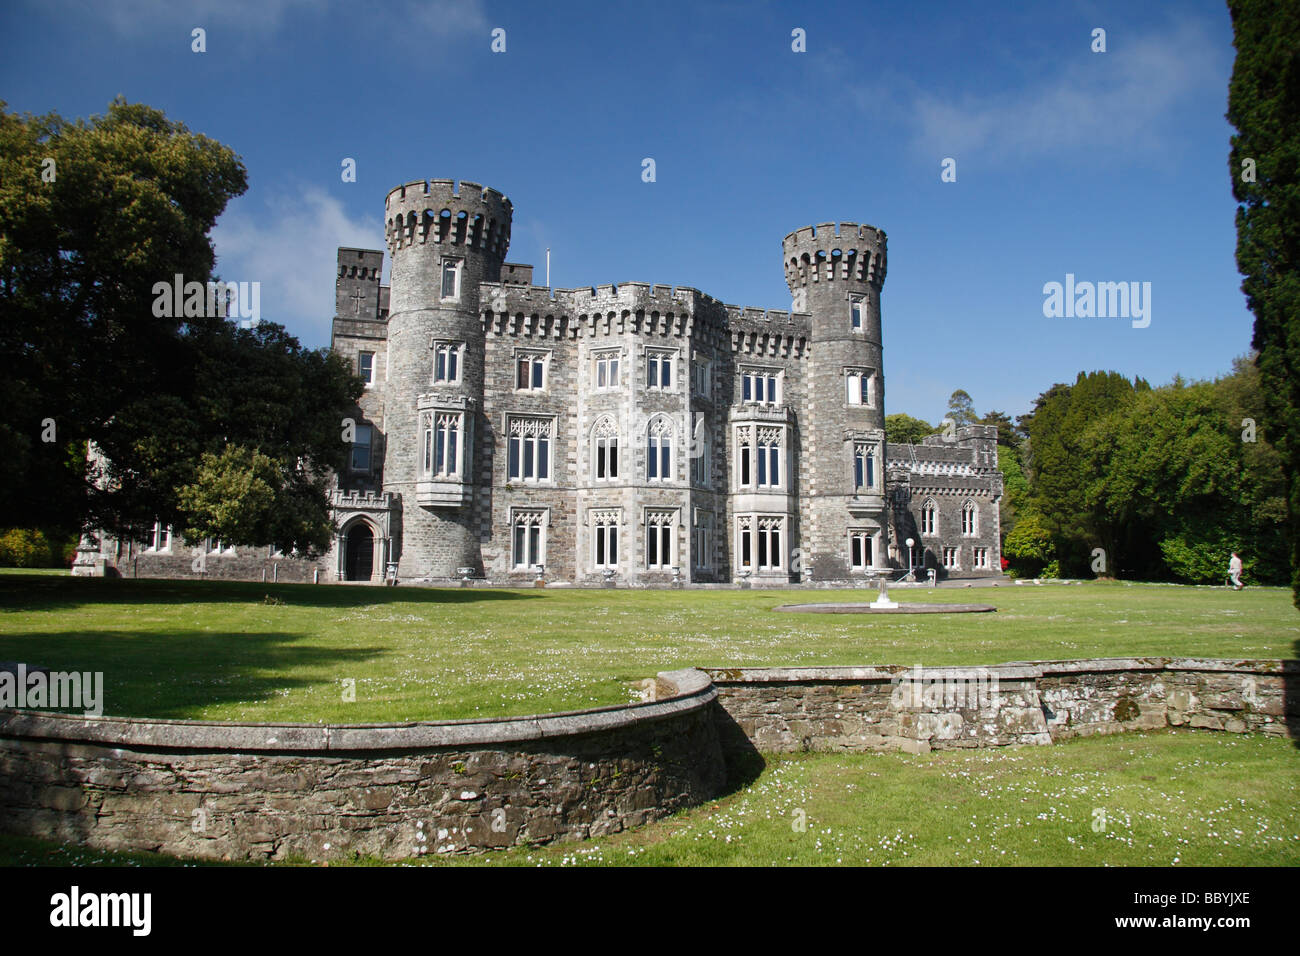 The beautiful grounds, castle & lake of Johnstown Castle, Co. Wexford, Ireland. Stock Photo